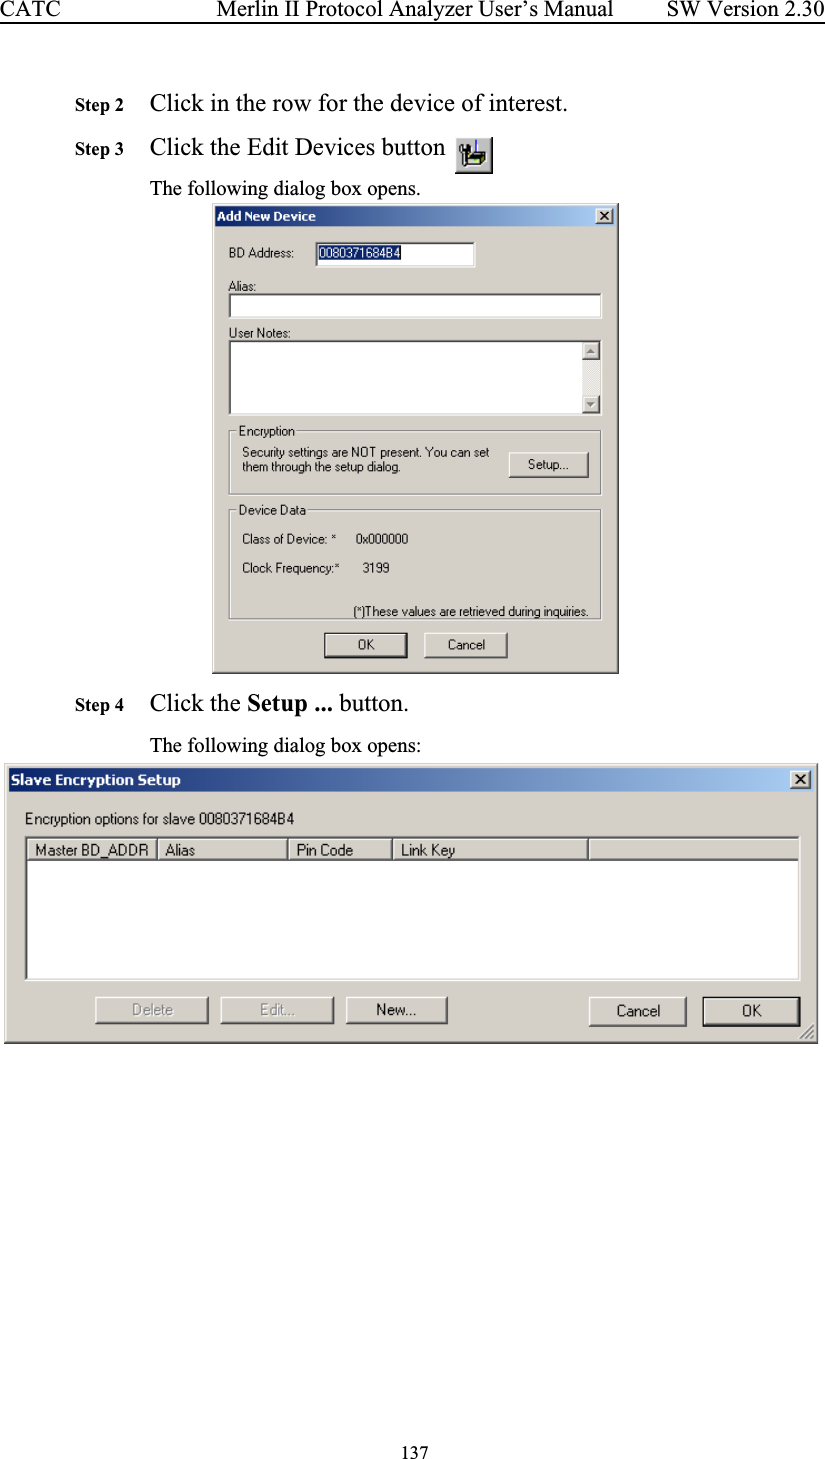  137 Merlin II Protocol Analyzer User’s ManualCATC SW Version 2.30Step 2 Click in the row for the device of interest.Step 3 Click the Edit Devices button The following dialog box opens.  Step 4 Click the Setup ... button.  The following dialog box opens: